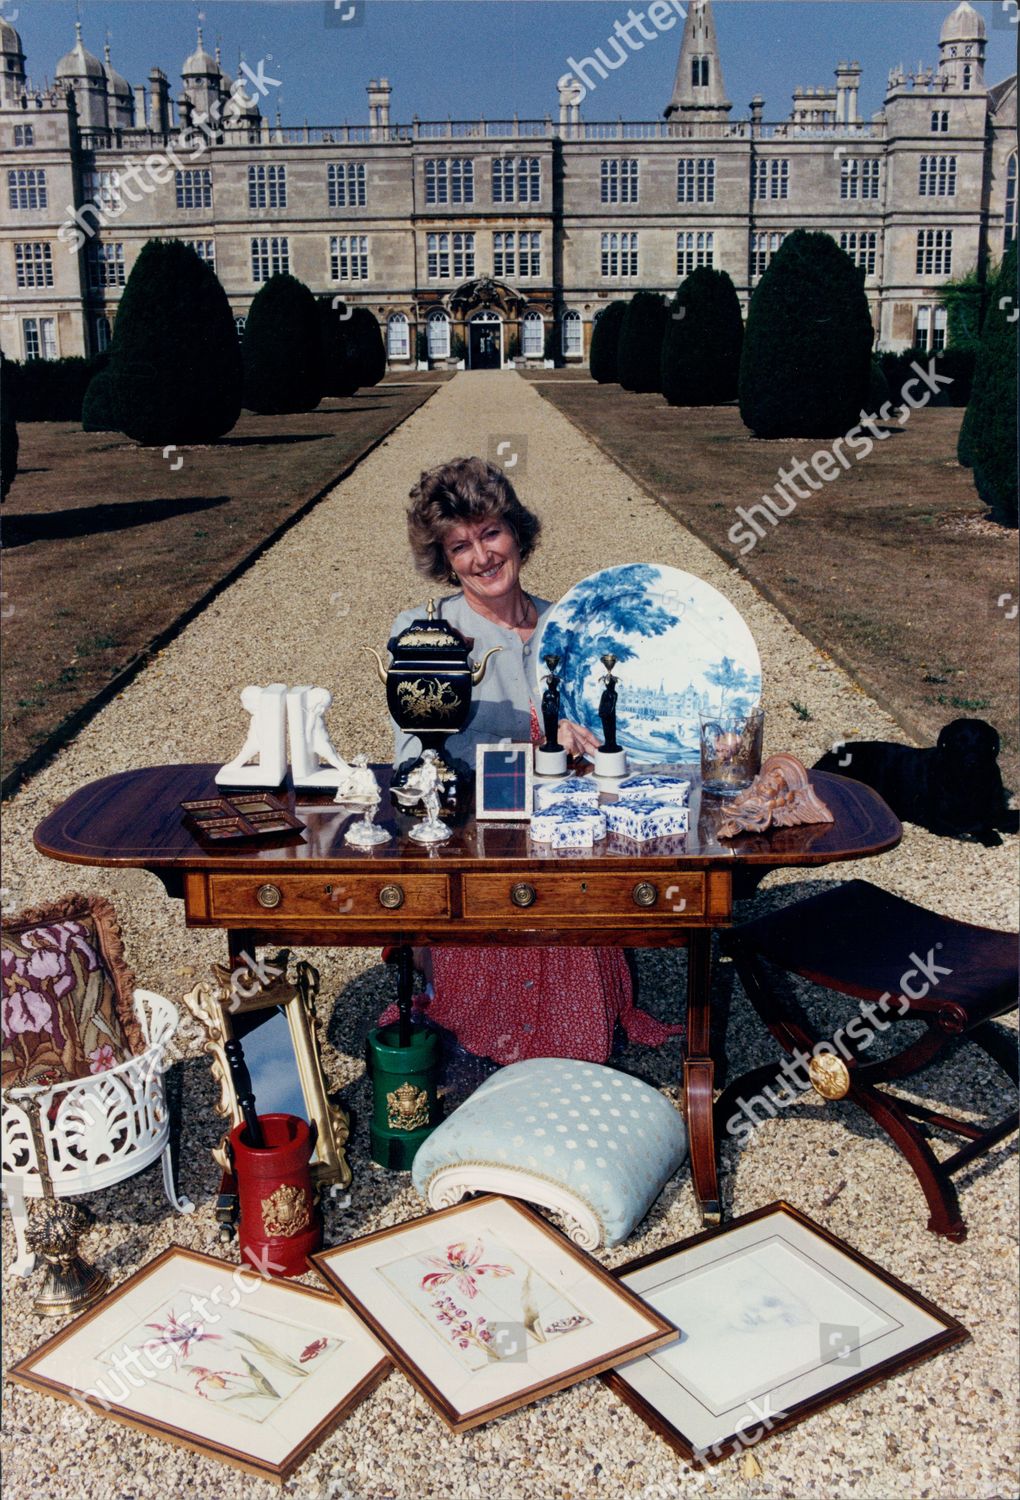 Lady Victoria Leatham Burghley House Pictured There Editorial